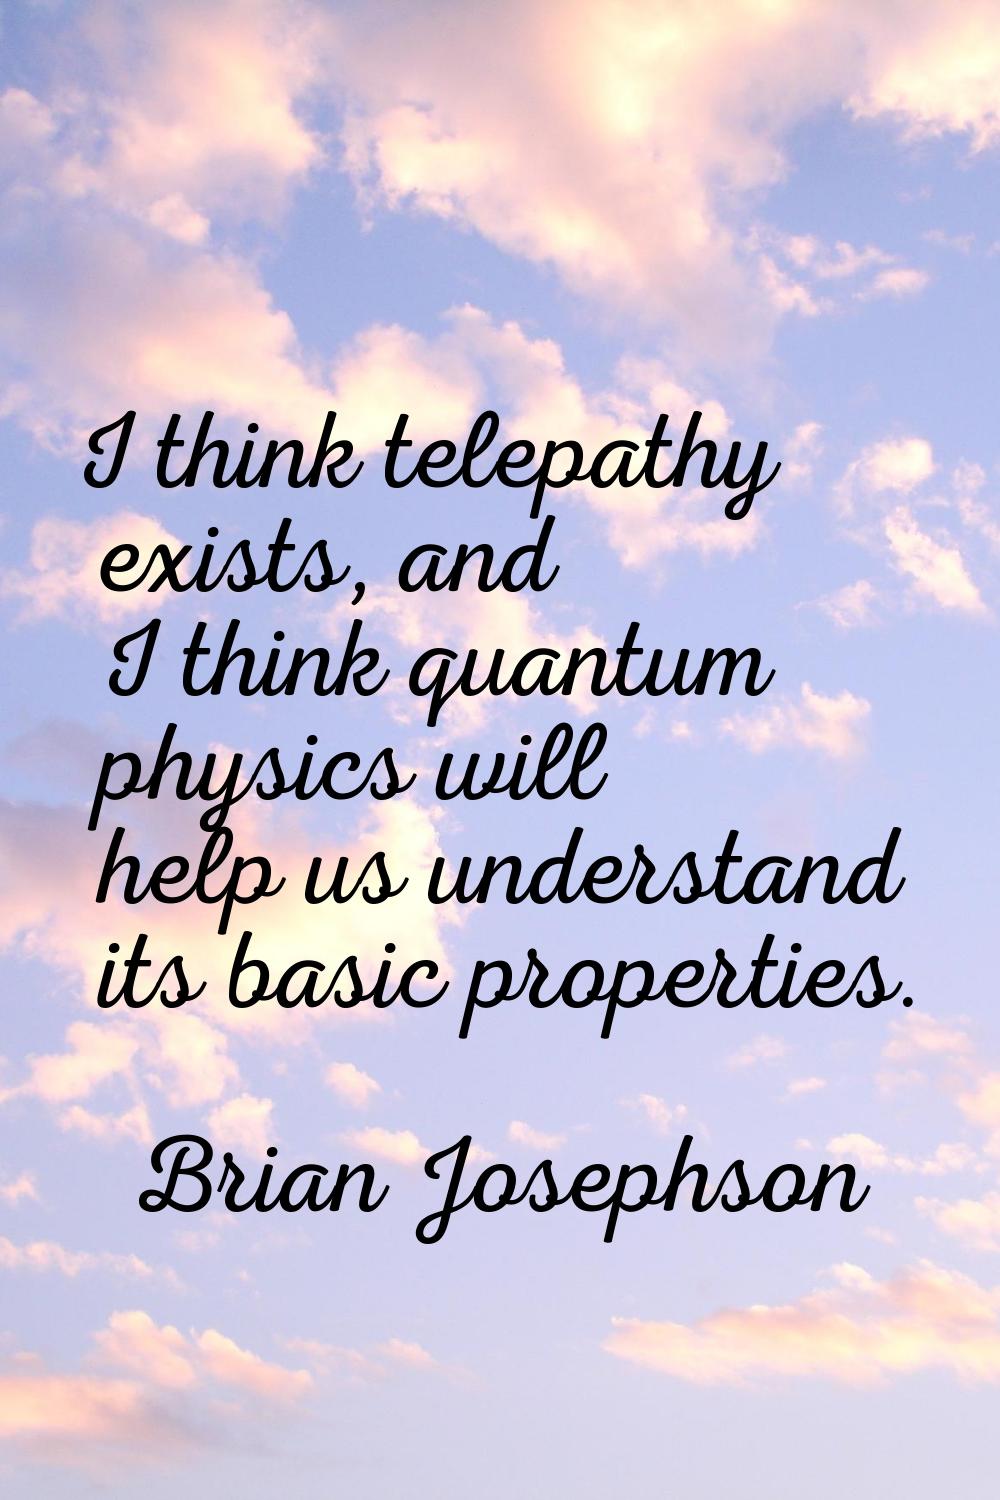 I think telepathy exists, and I think quantum physics will help us understand its basic properties.